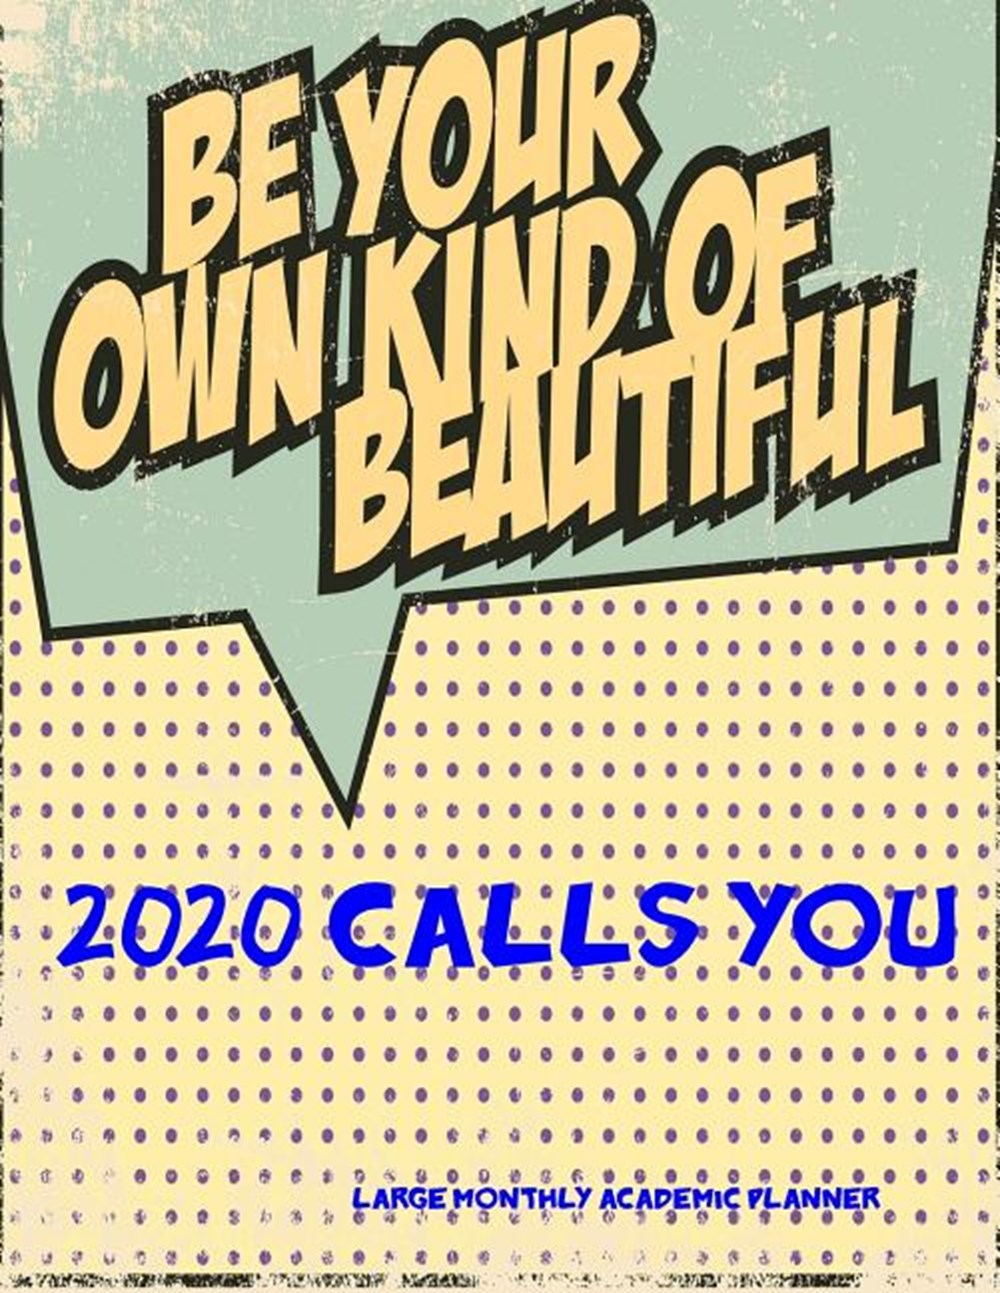 2020 Calls You- Be Your Own Kind of Beautiful- Large Monthly Academic Planner July 2019 To December 